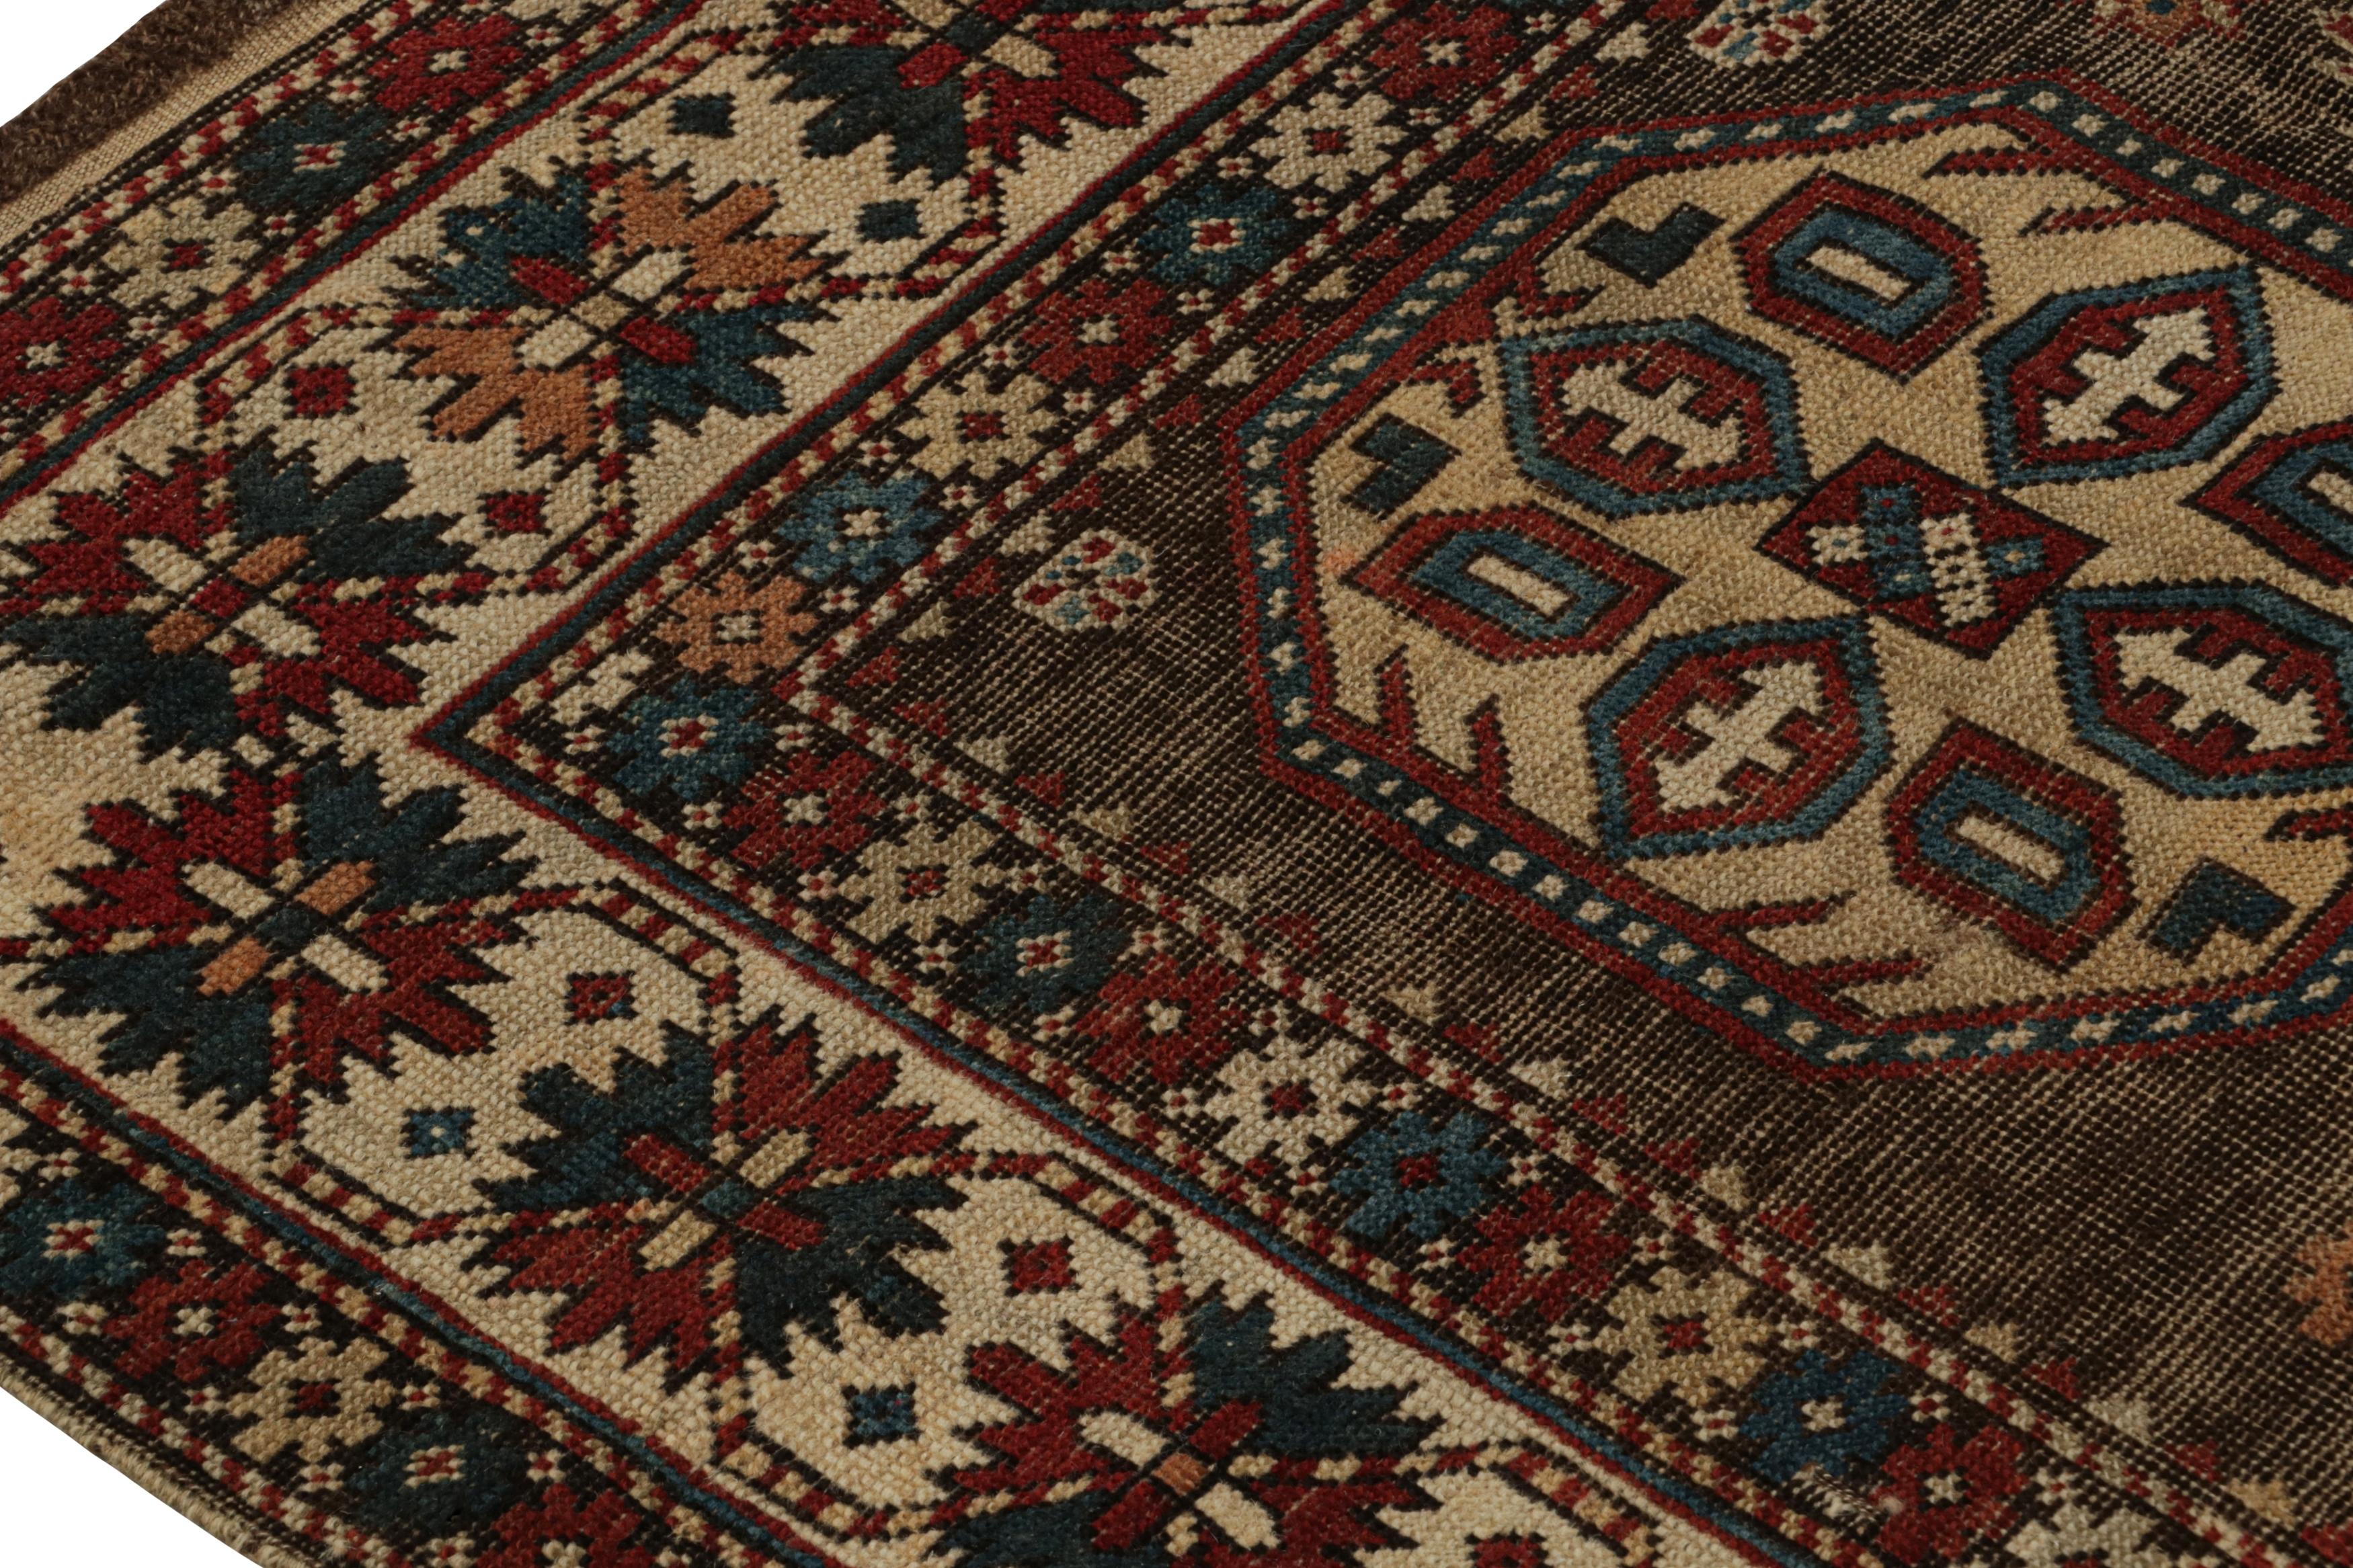 Antique tribal Kazak rug in Brown with Geometric Patterns, from Rug & Kilim In Good Condition For Sale In Long Island City, NY